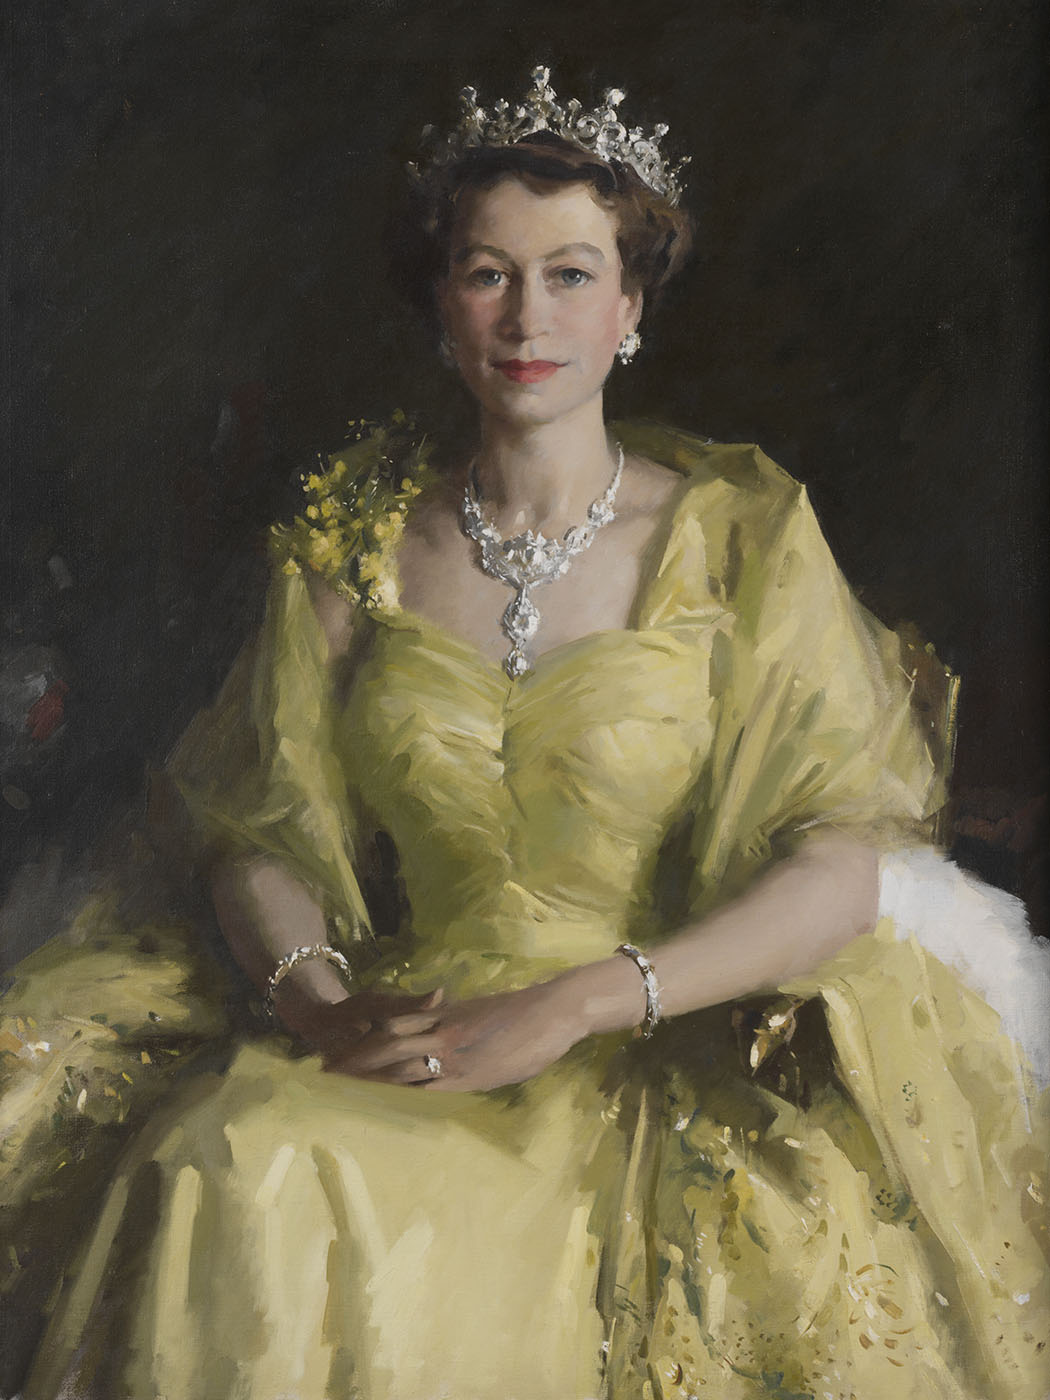 Detail of portait of Queen Elizabeth II wearing a pale yellow dress and tiara.